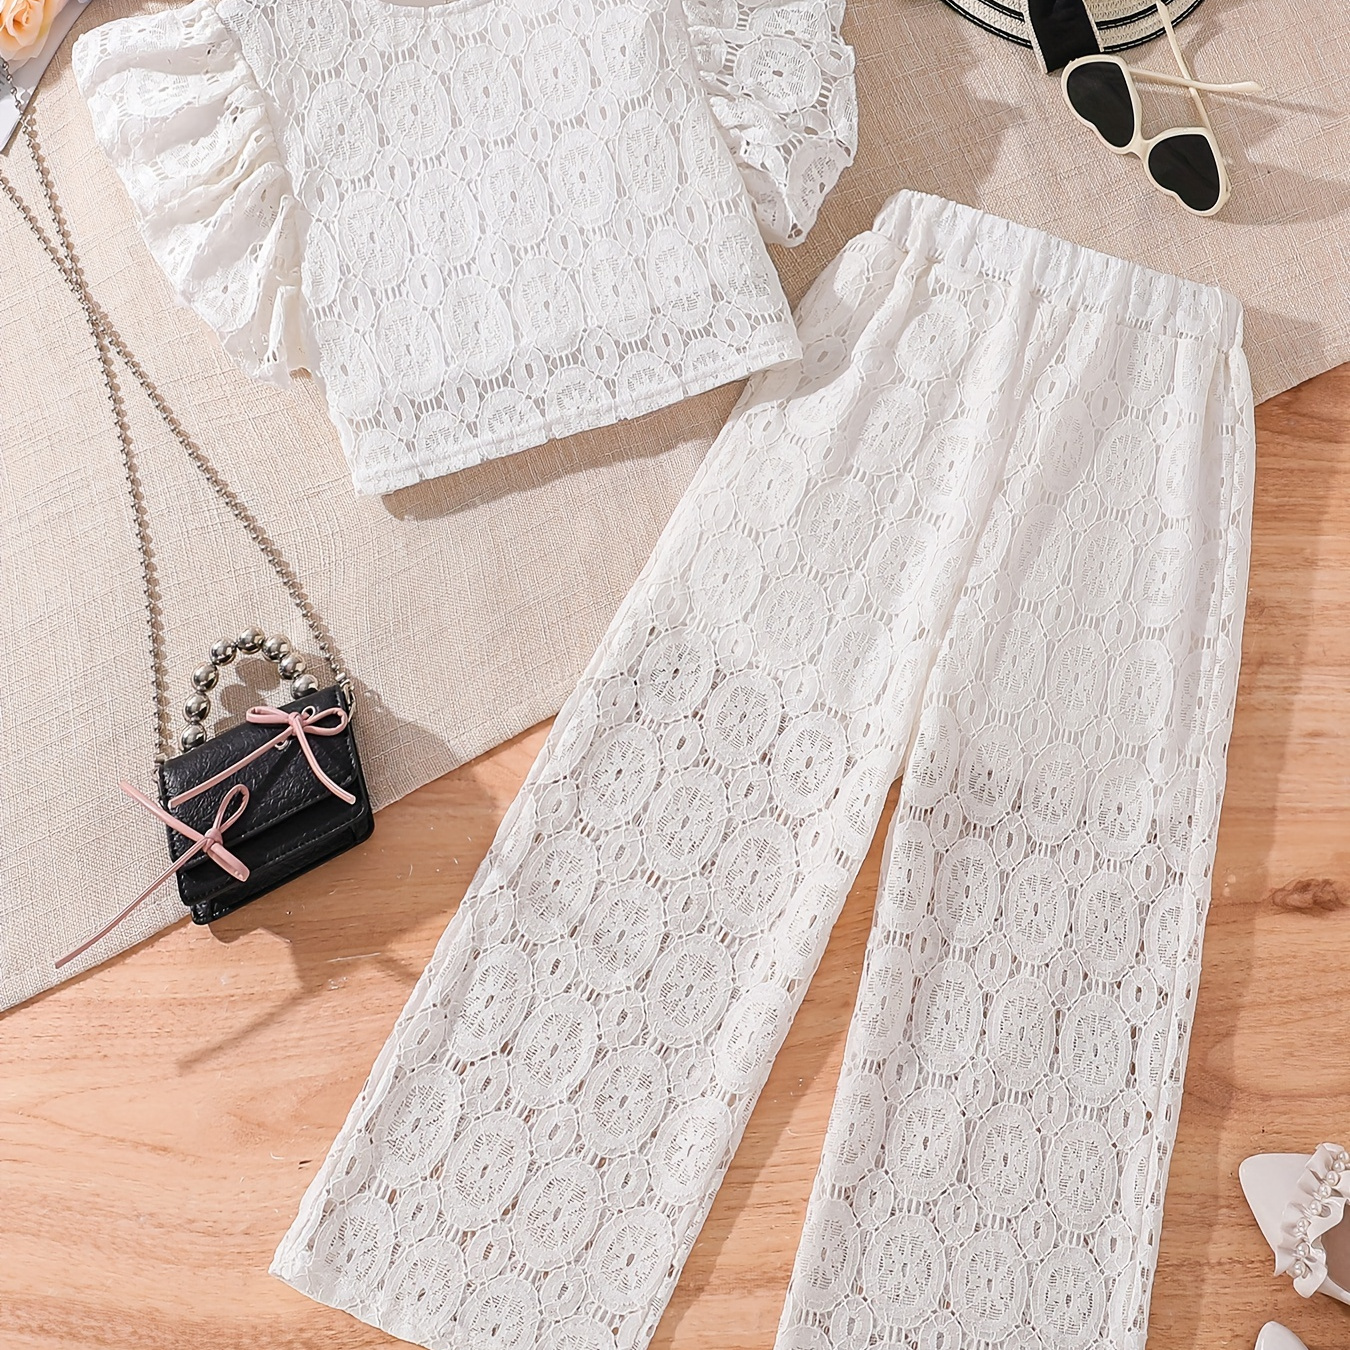 

Elegant Lace Set 2pcs, Flounce-sleeve Top + Hollo-out Pants Girl's Summer Clothes - Perfect For Casual Outings, Gift Idea